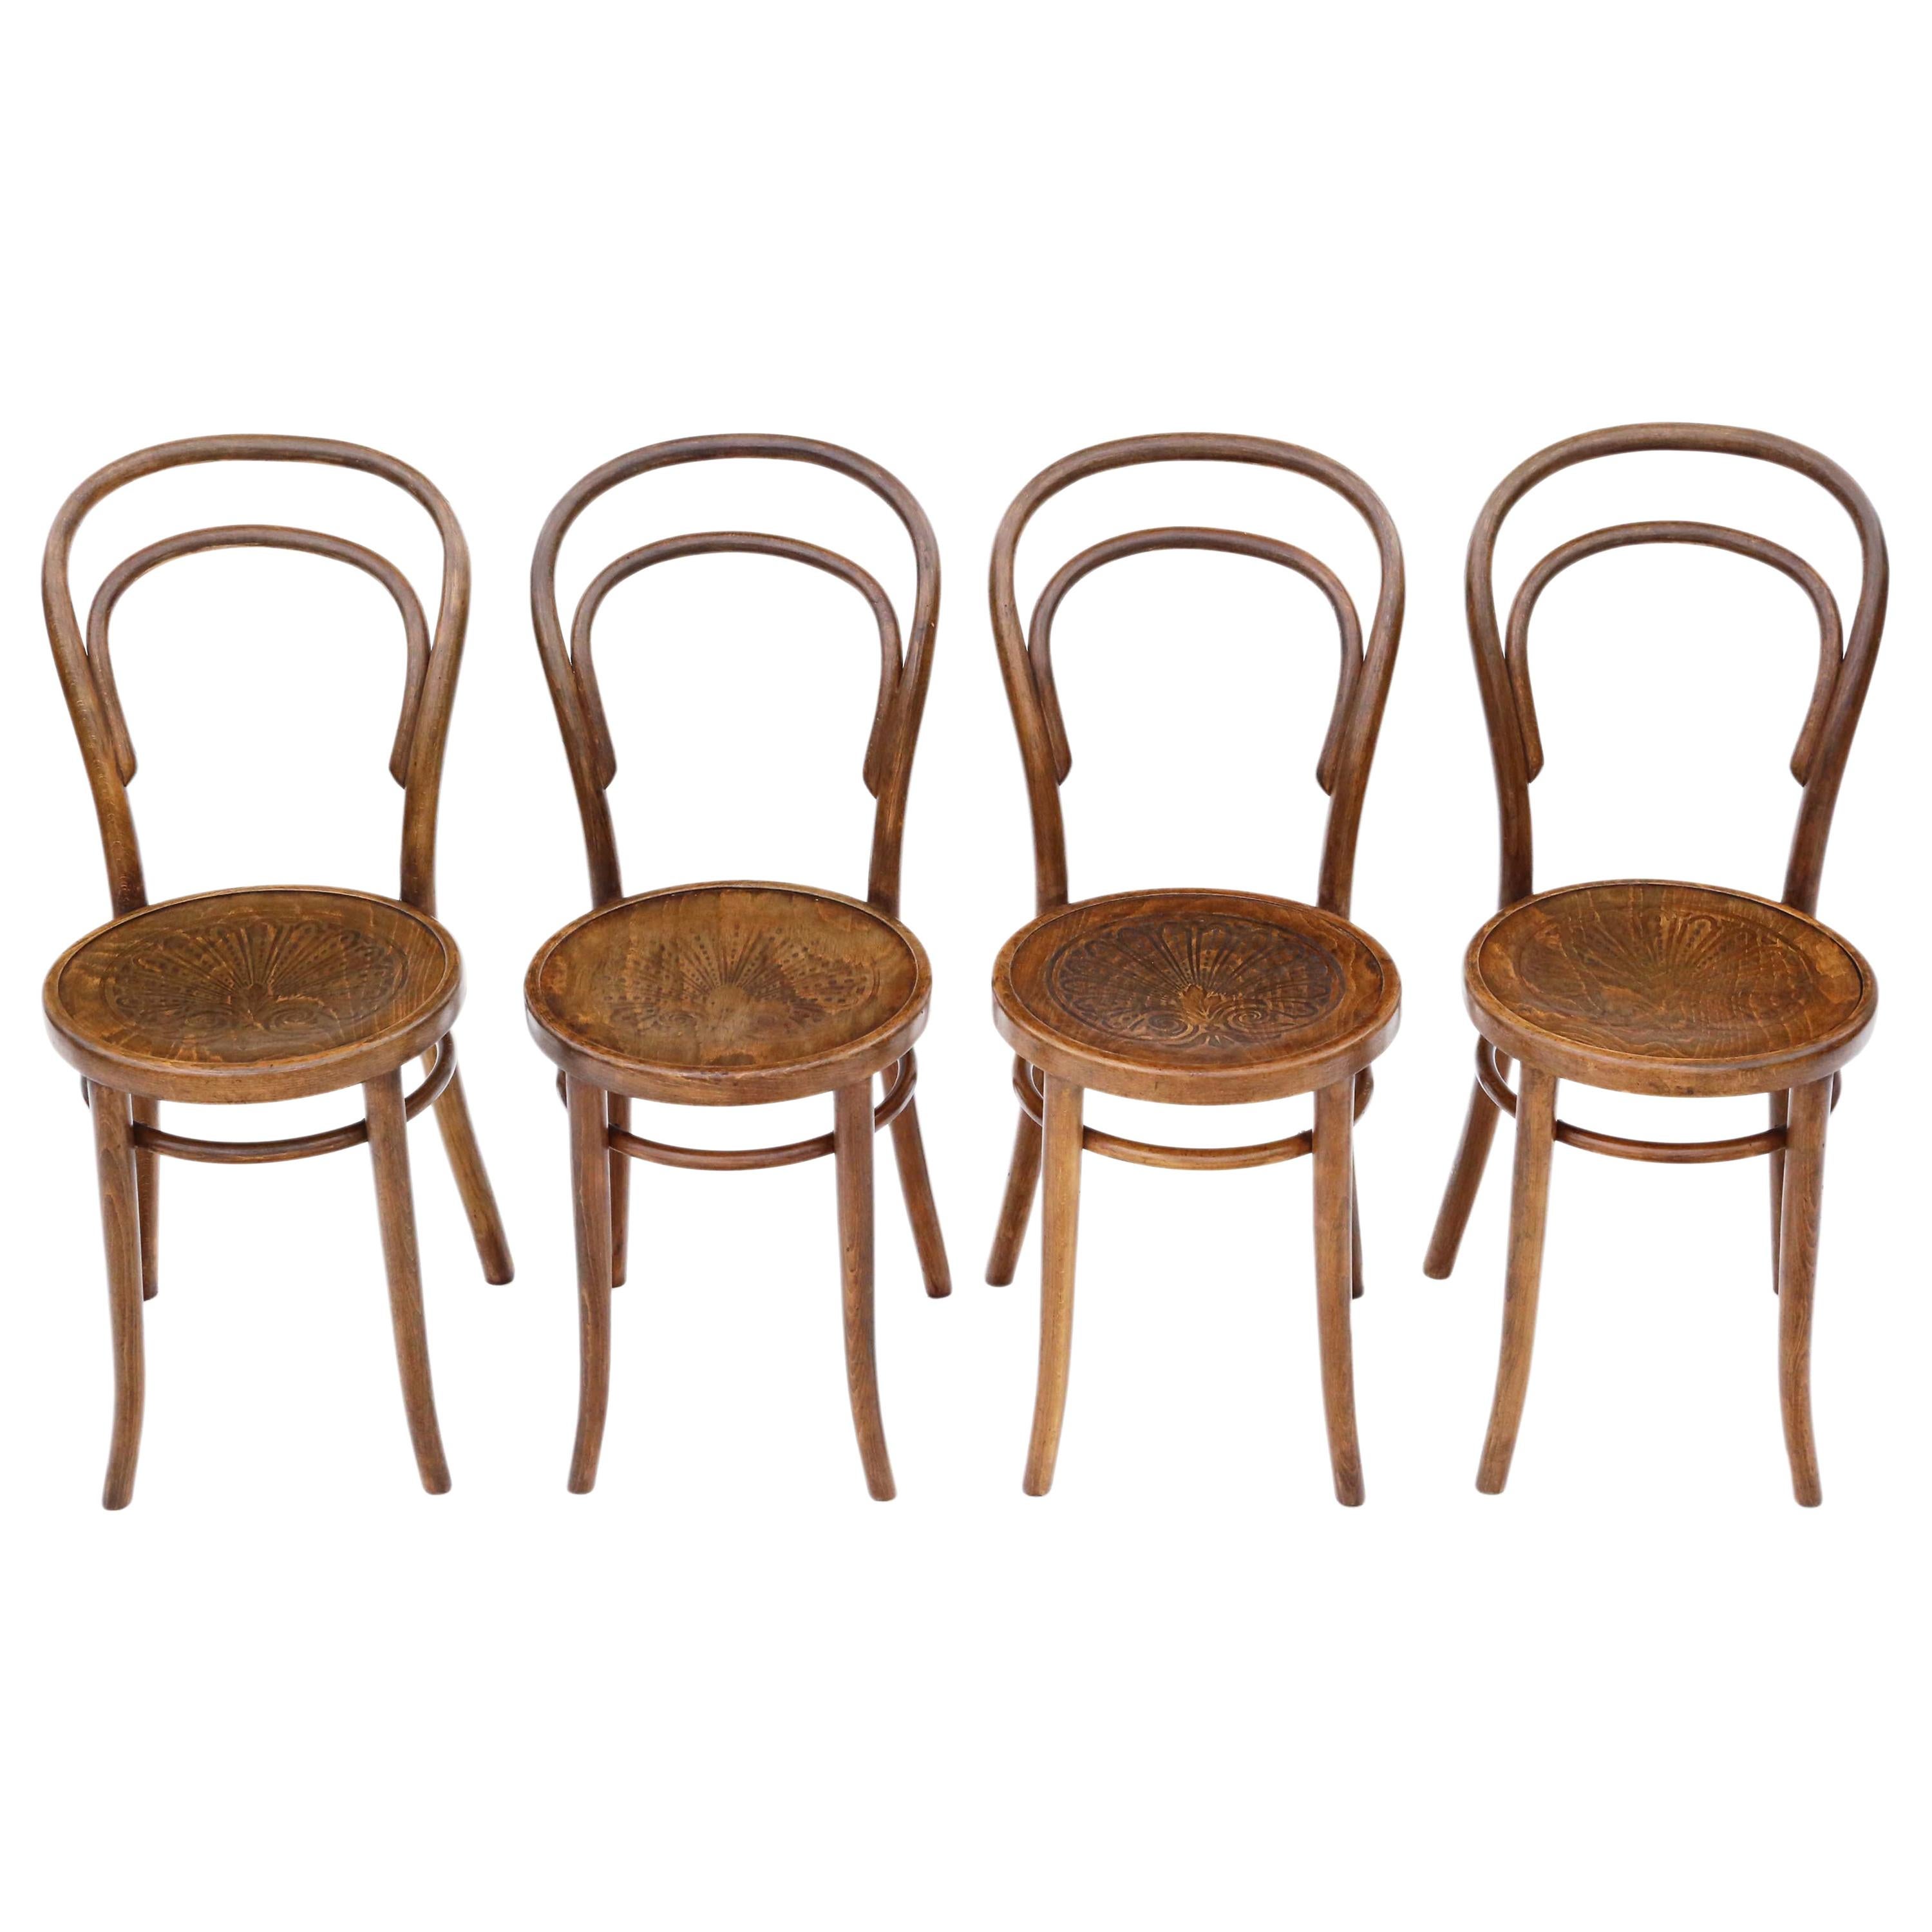 Antique Set of 4 Bentwood Kitchen Dining Chairs, Early 20th Century